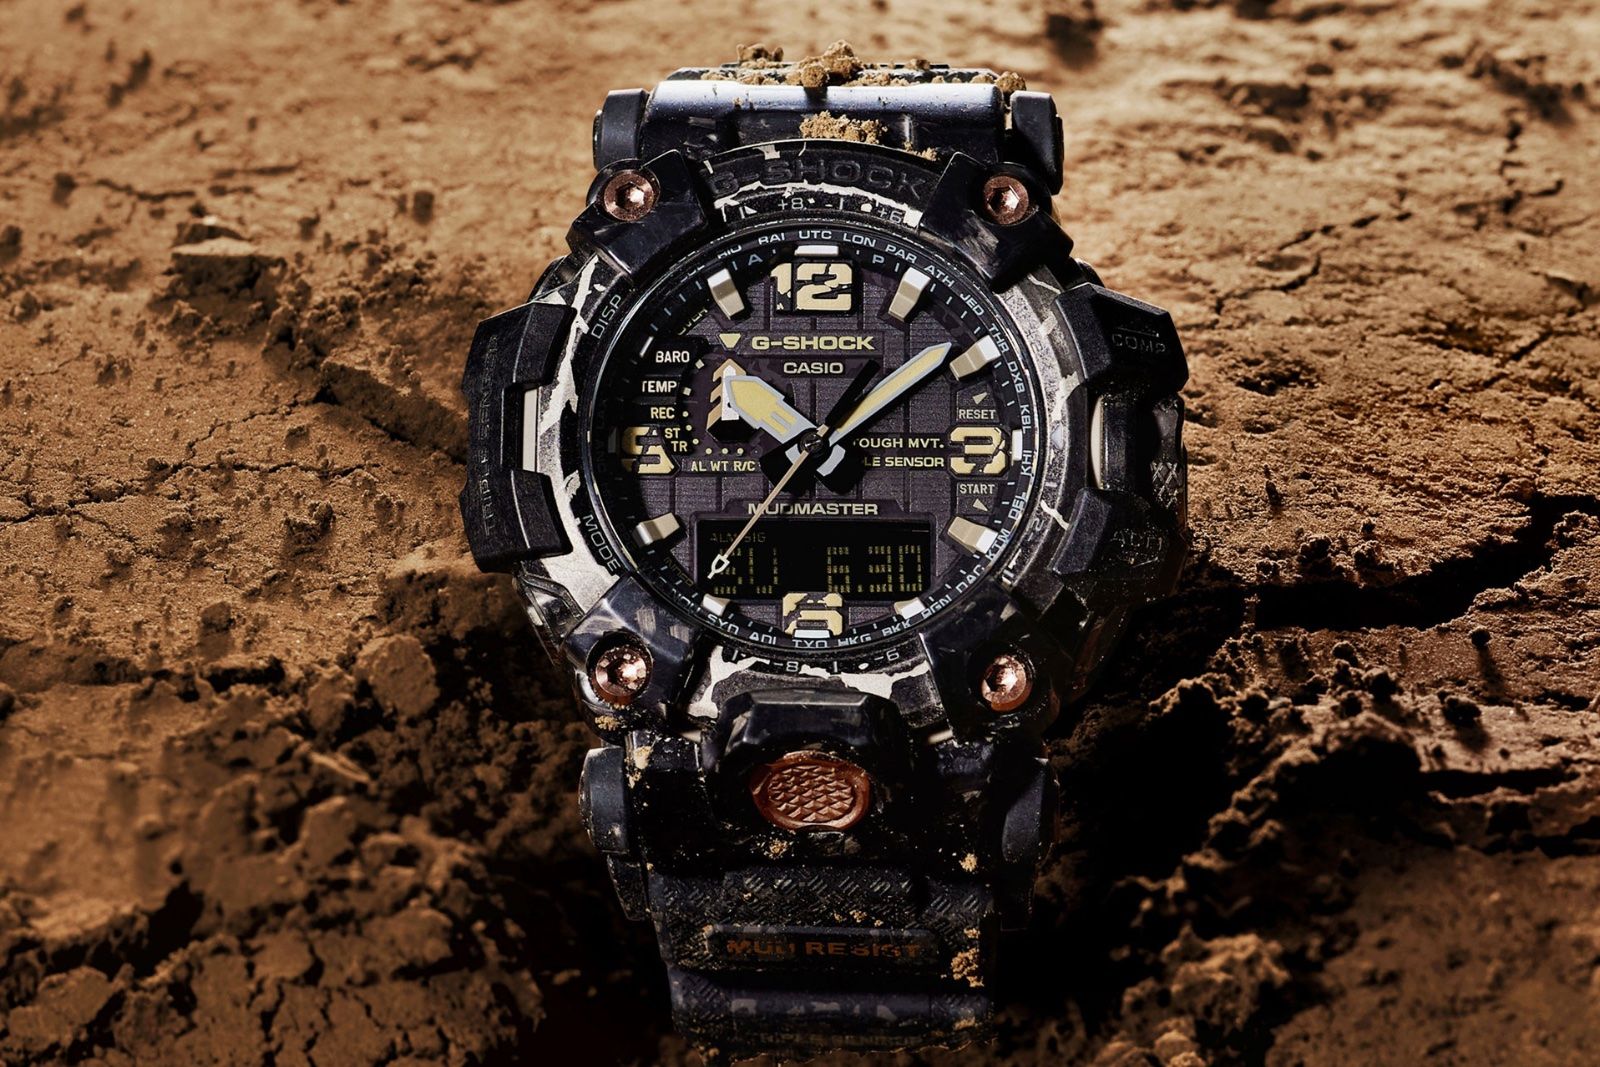 The G-Shock Cracked Mud Mudmaster is another must-have limited edition watch